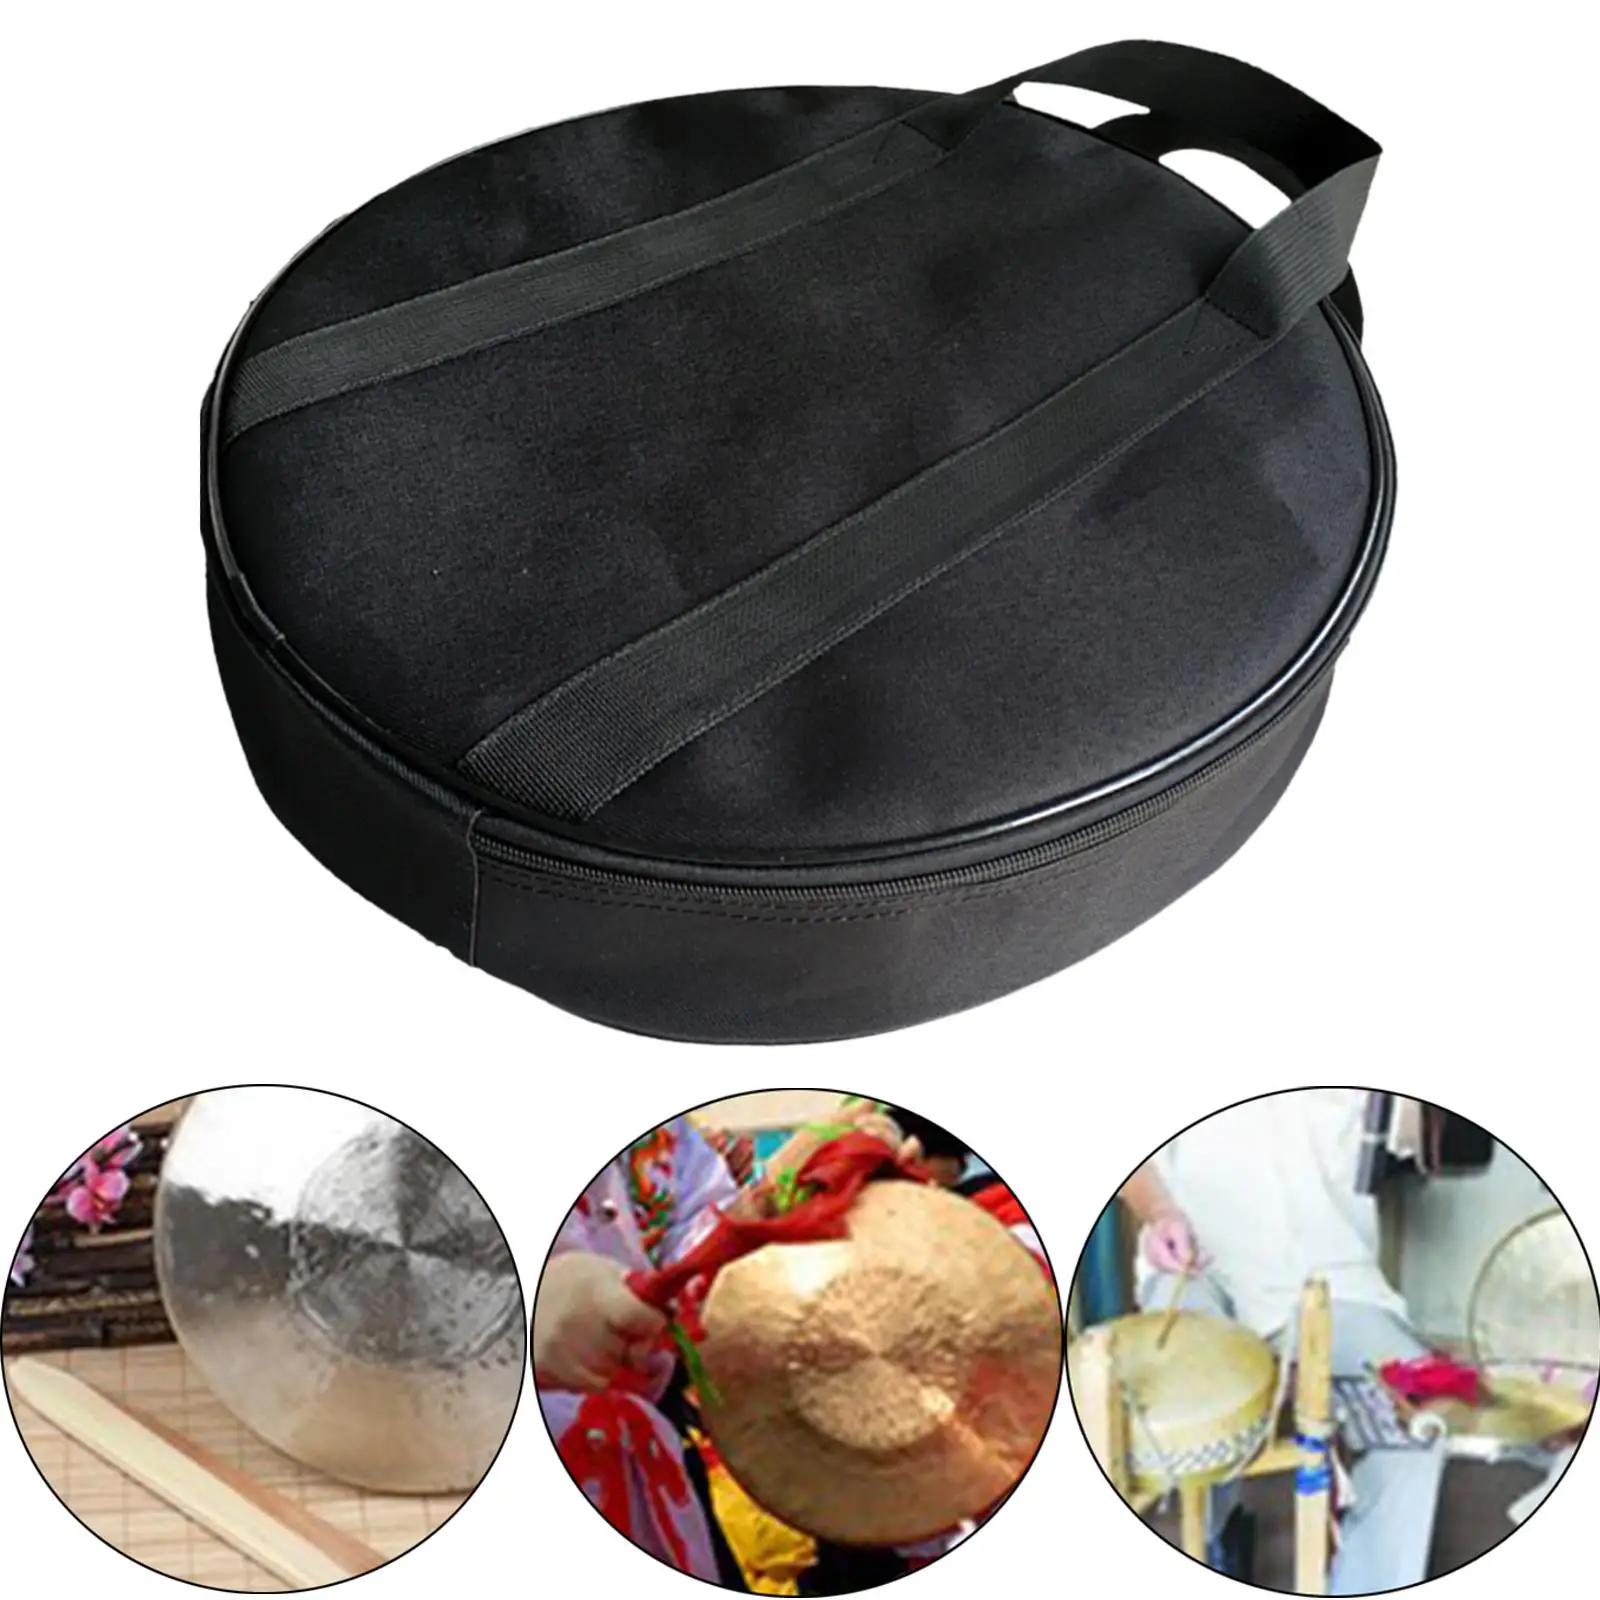 Deluxe Cymbal Gig Bag Thickened High Quality Waterproof Carry Case Storage Bag Backpack